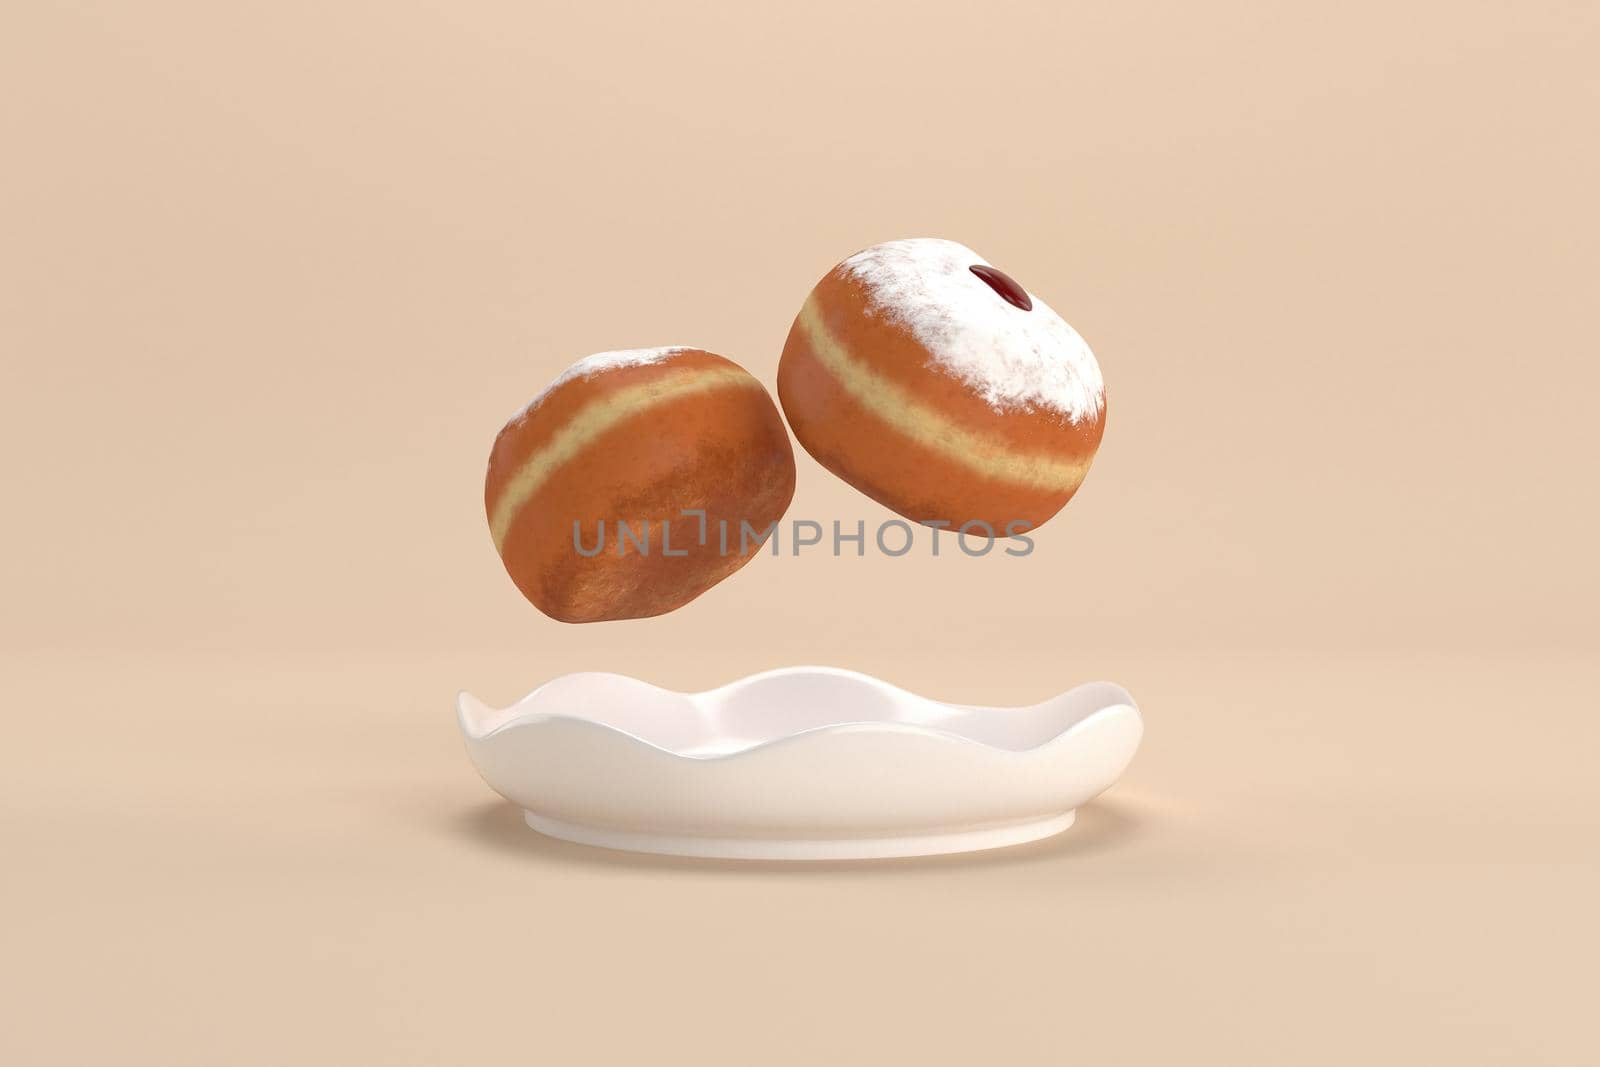 3d rendering Image of Jewish holiday Hanukkah with donuts on a  yellow background.